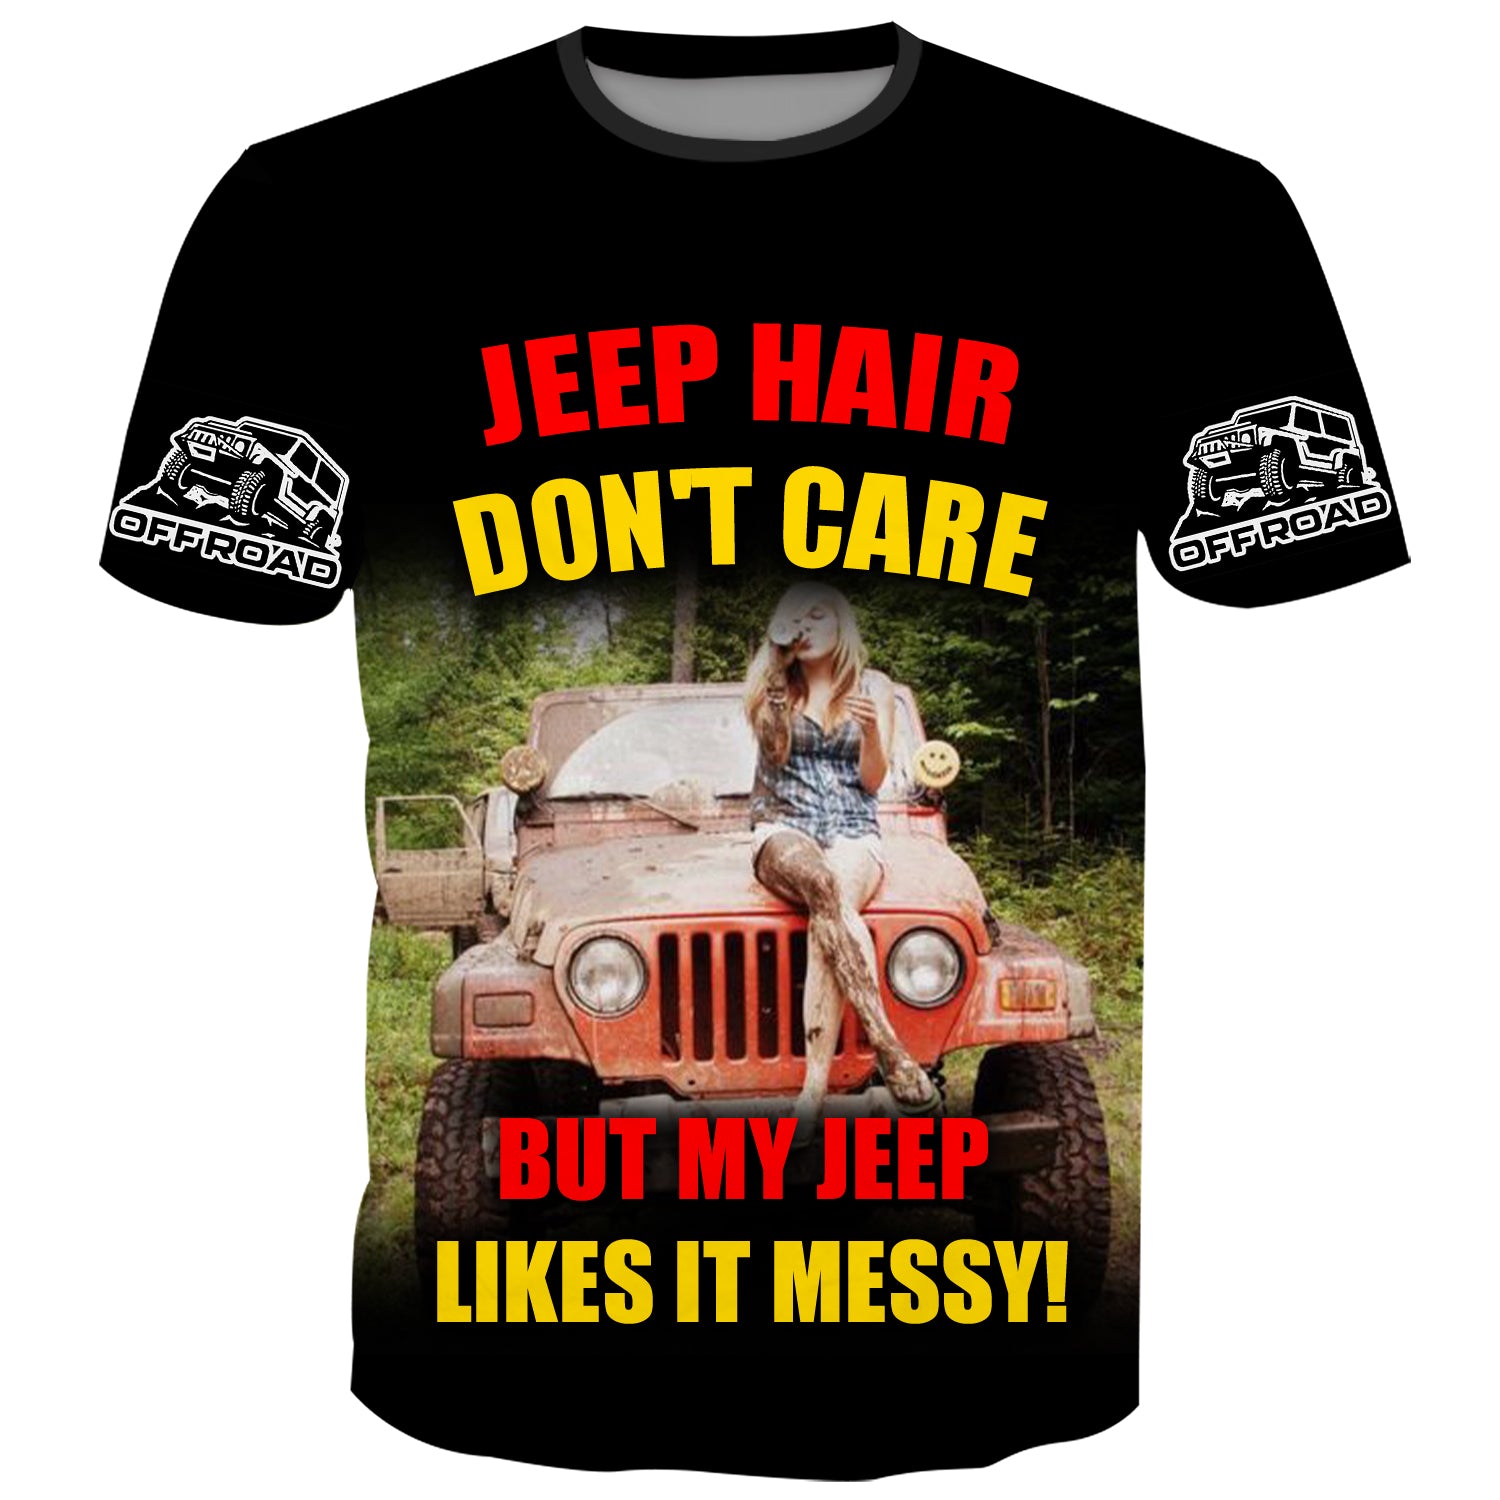 Jeep Hair, don't care but my Jeep likes it messy - T-Shirt